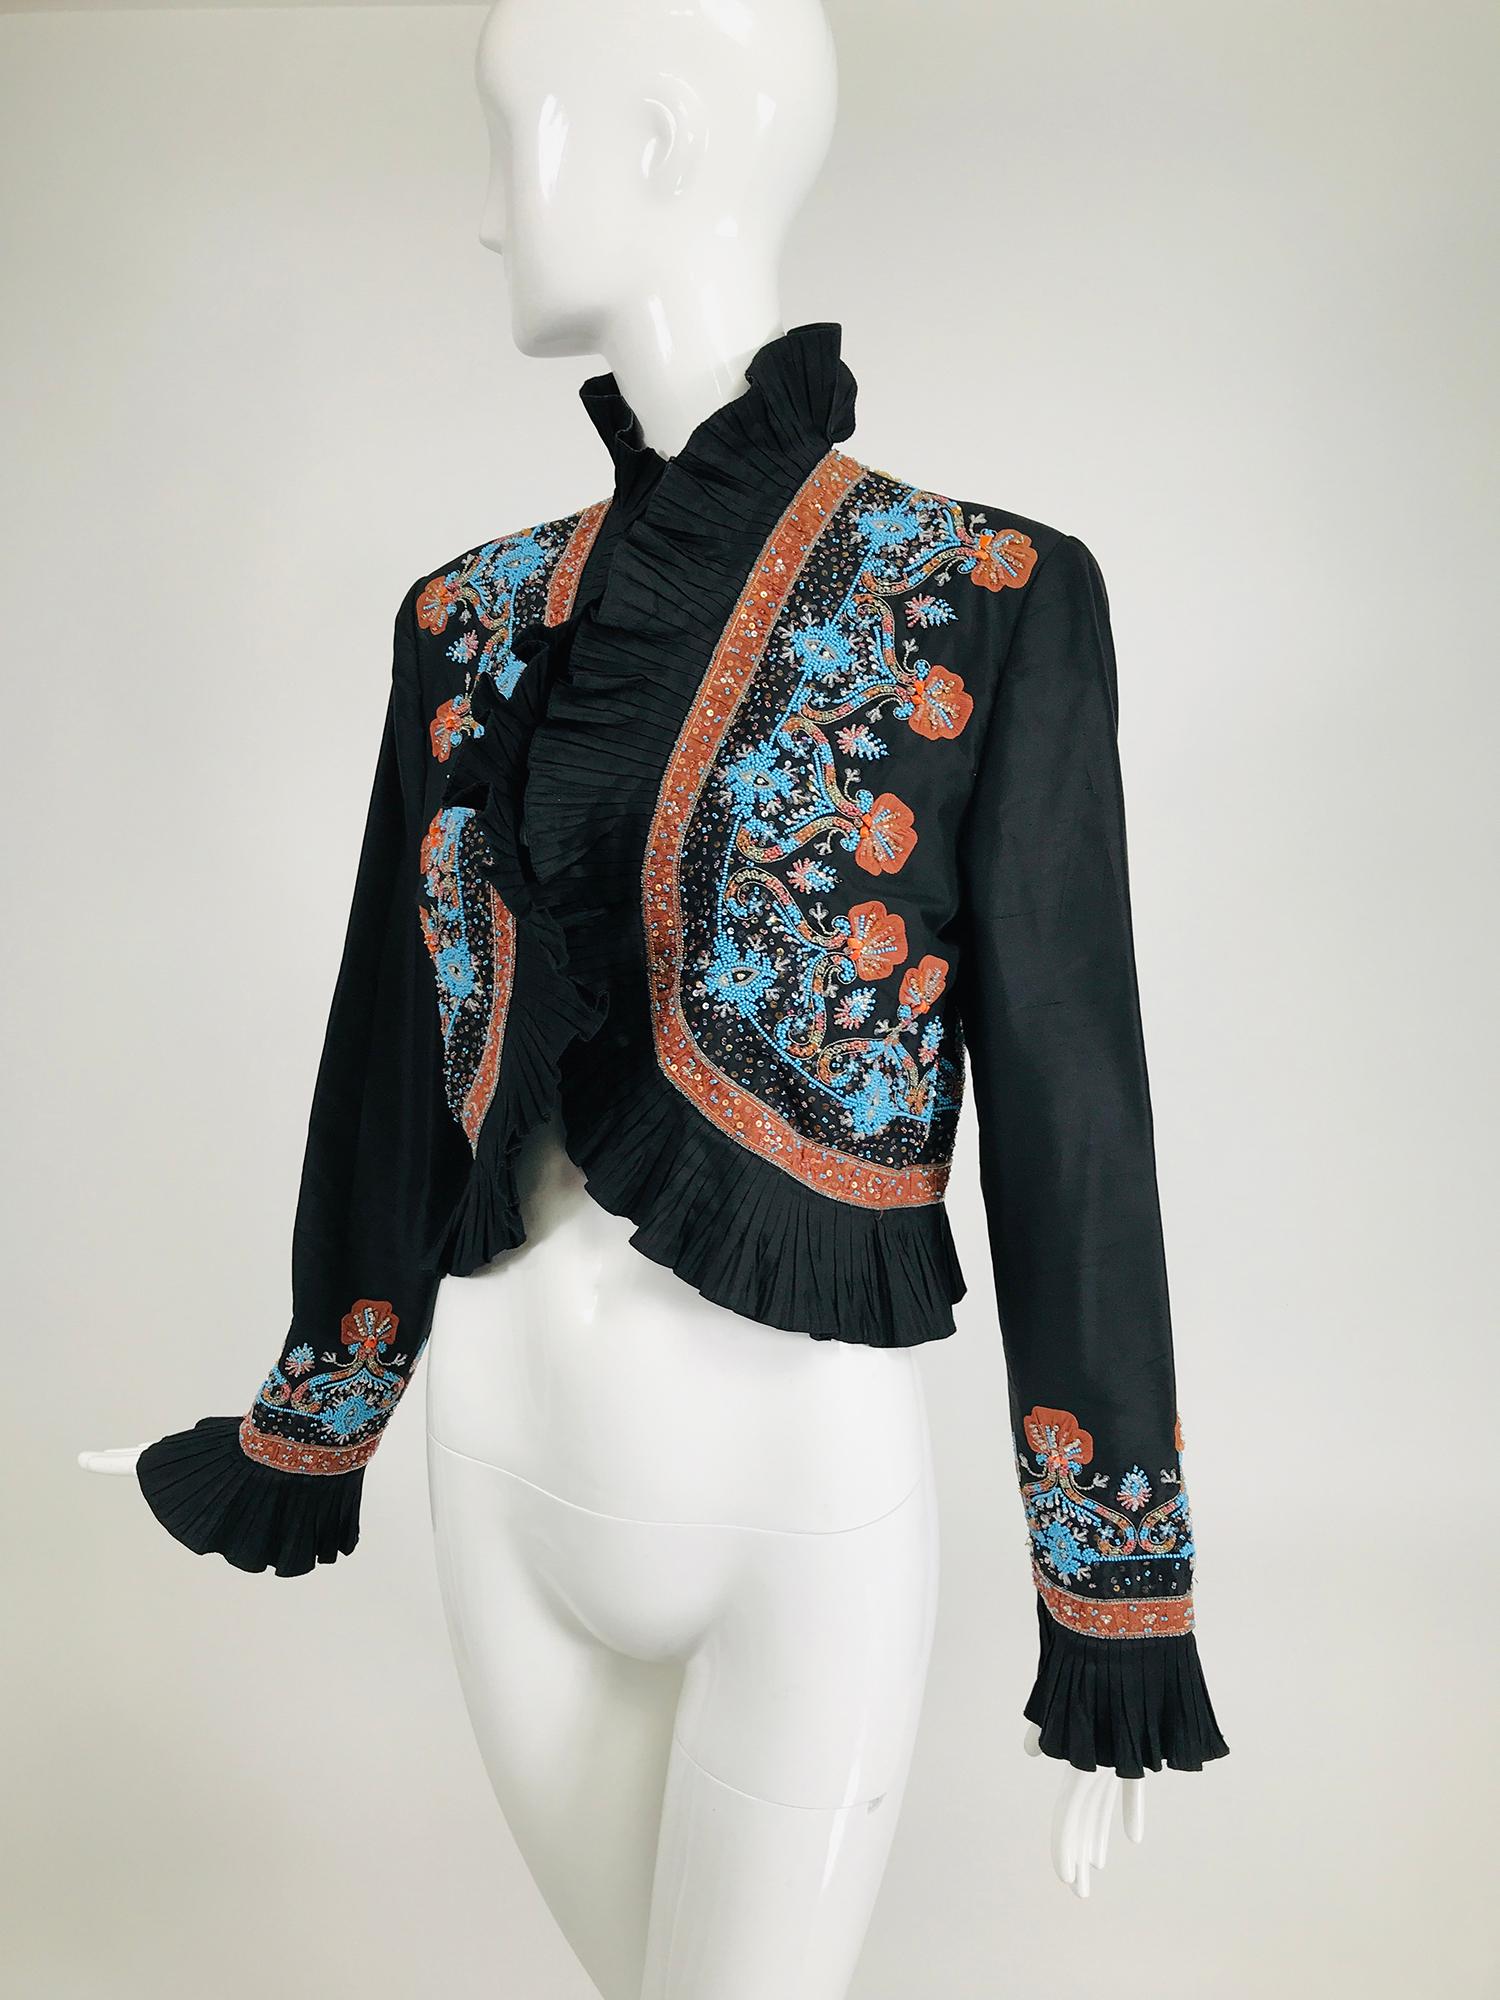 Mary Ann Restivo embroidered black silk taffeta bolero jacket. Beautiful ruffle trim cropped jacket with amazing embroidery, with beads & sequins done in coral and turquoise. The jacket is open at the front with a ruffle edge, long sleeves have